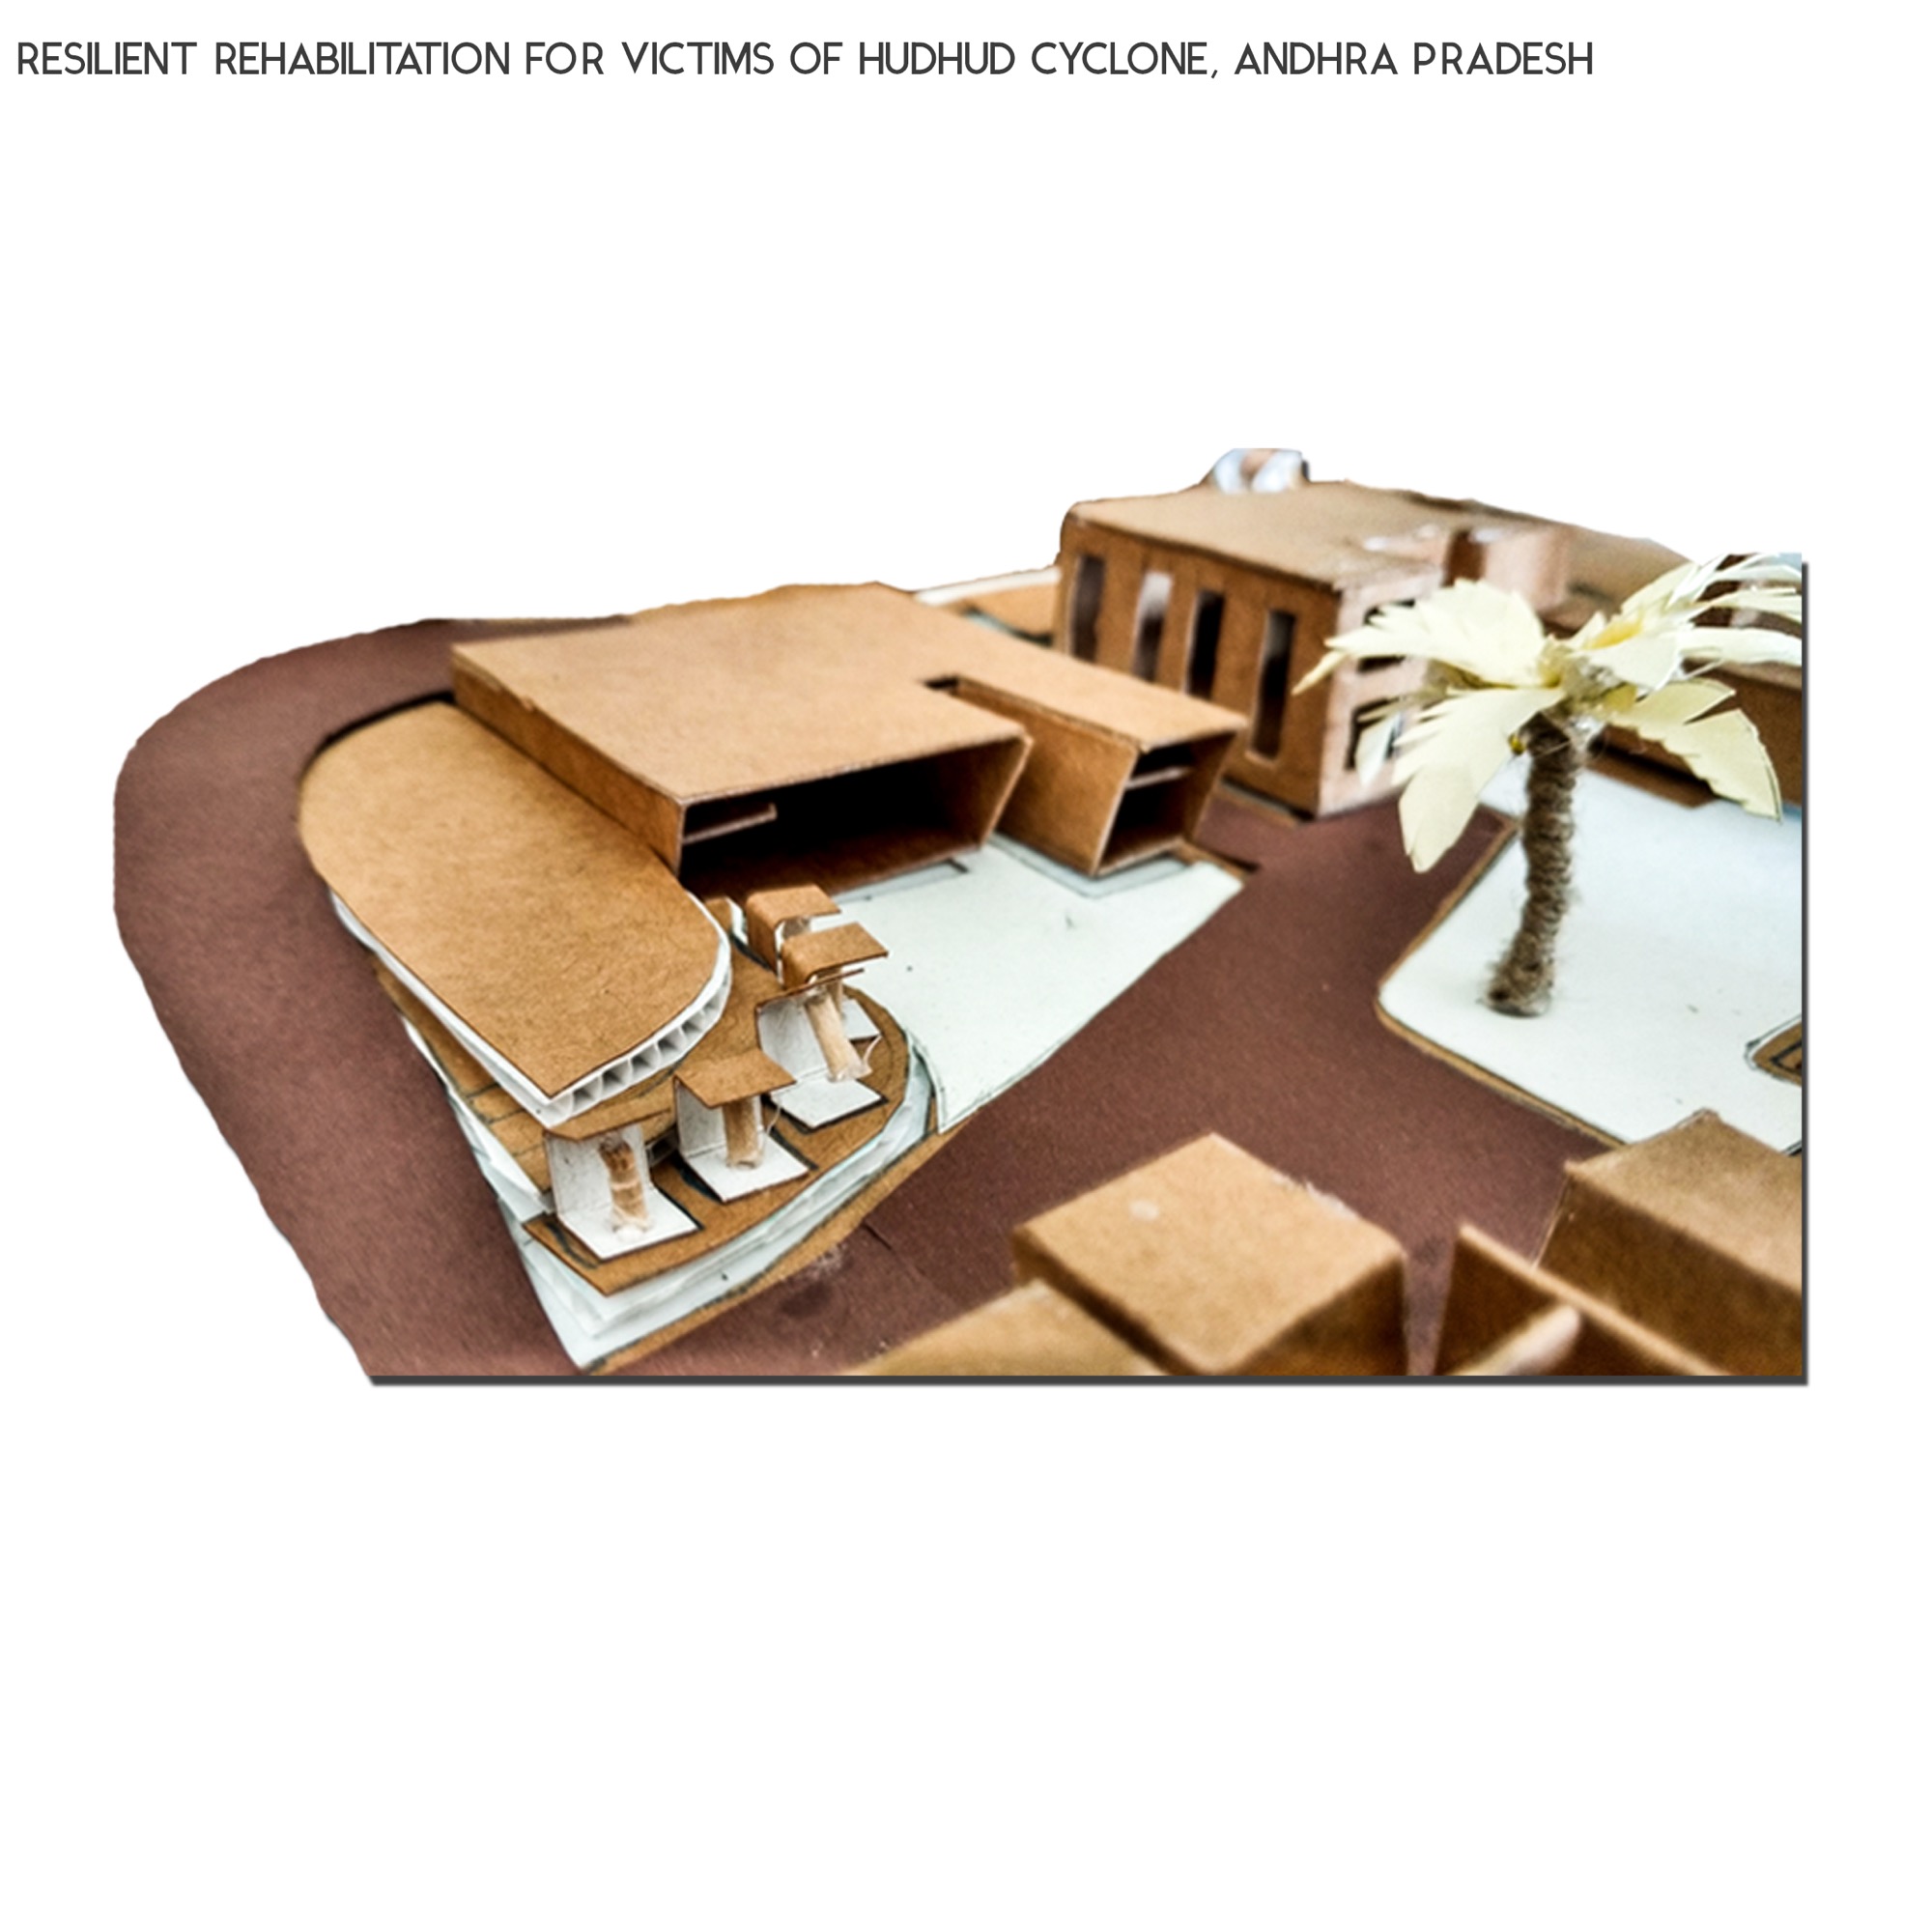 B.Arch Thesis: RESILIENT REHABILITATION FOR VICTIMS OF HUDHUD CYCLONE, ANDHRA PRADESH, by Sanand Telang 47